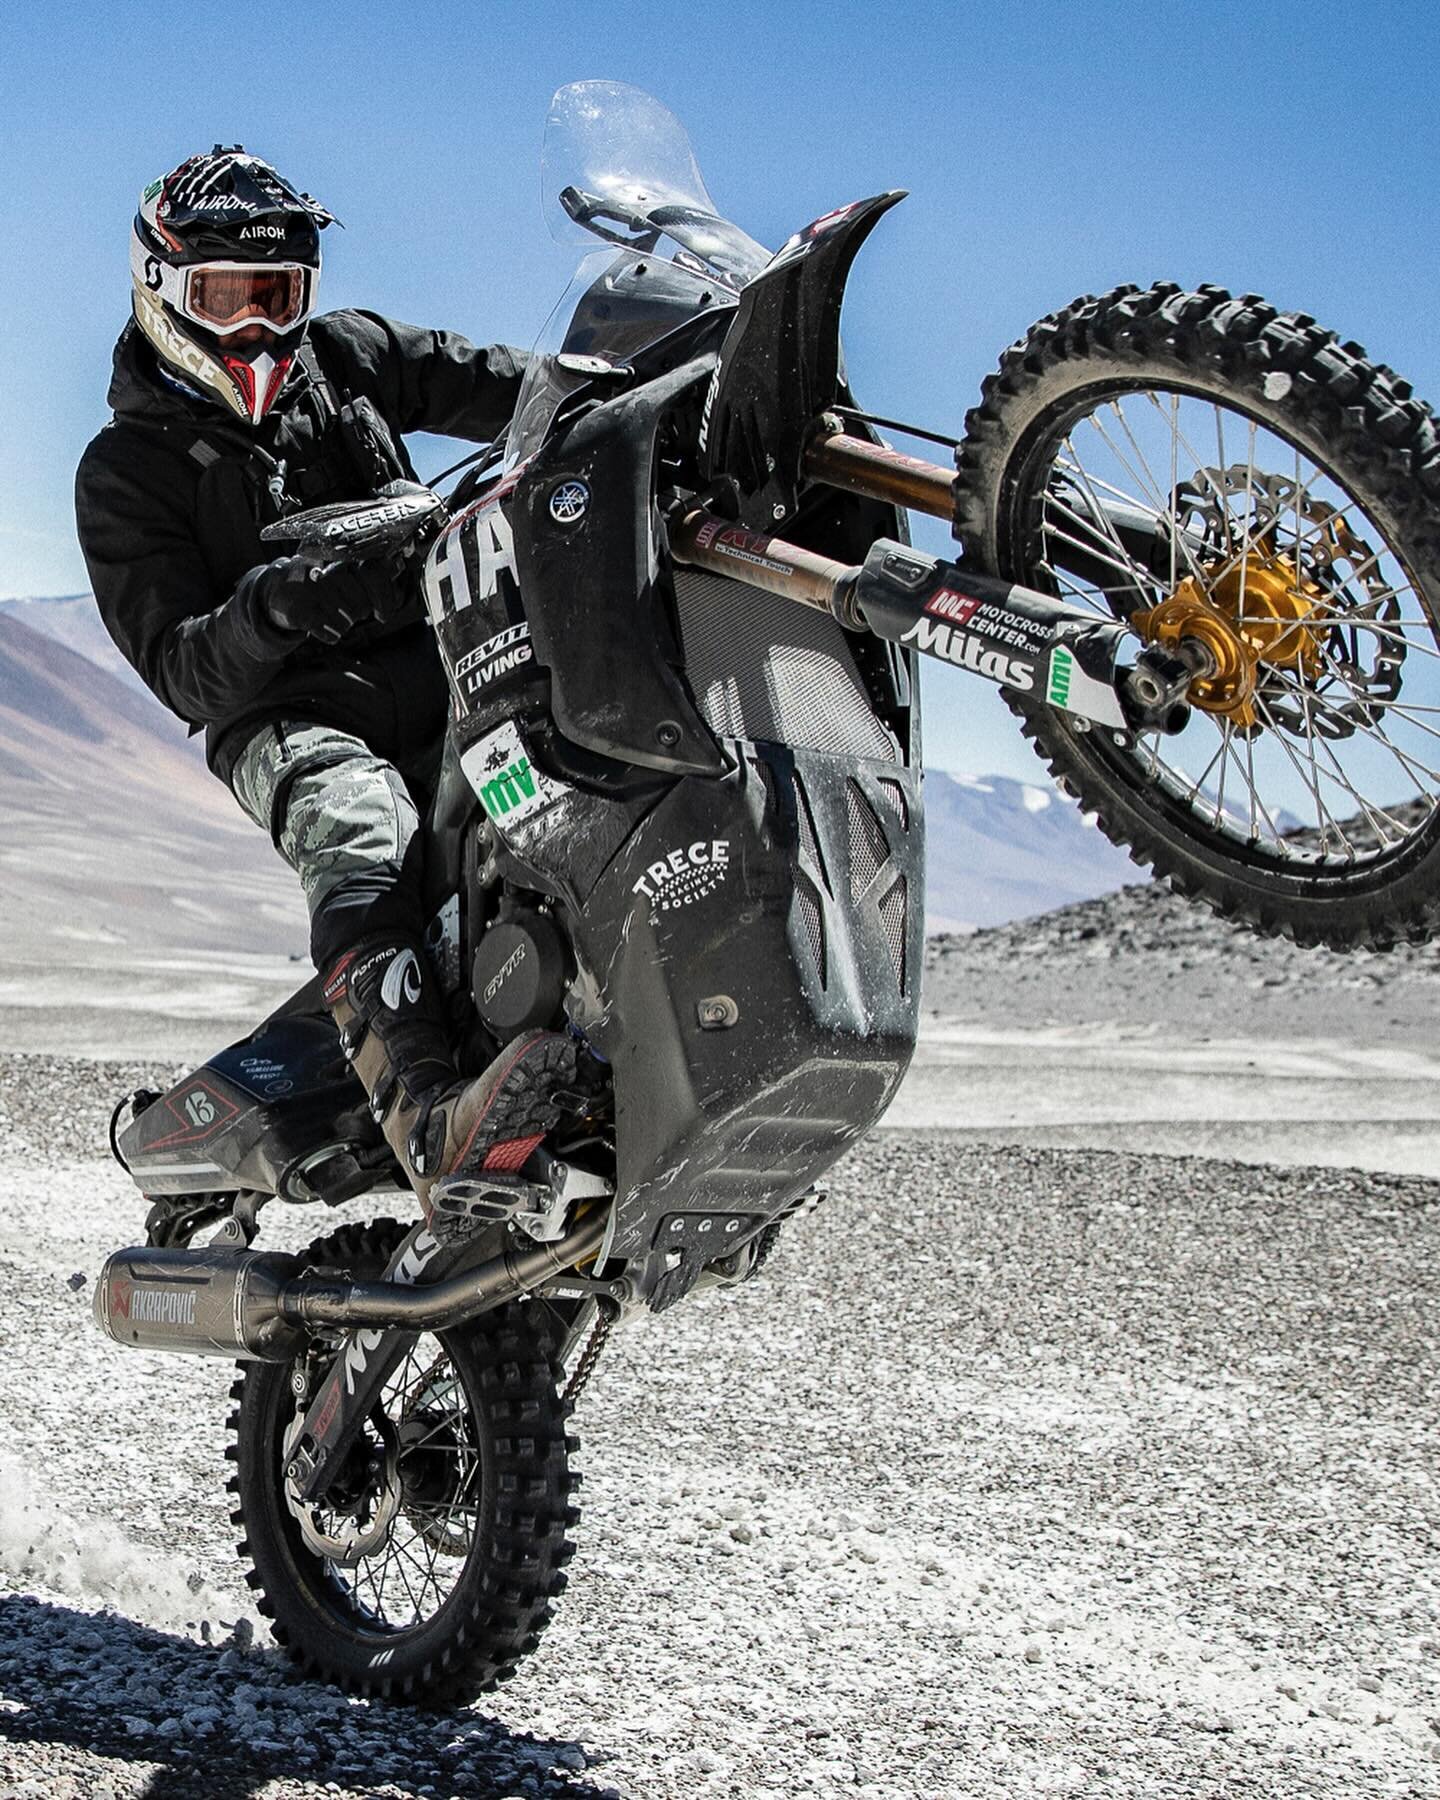 RIDING HIGH
Congratulations to @poltarres13 and the @treceracing_society team for taking the Altitude Riding World Record for a twin cylinder bike riding his Yamaha World Raid, adapted with  extra fuel capacity and special ECU for the lack of oxygen.